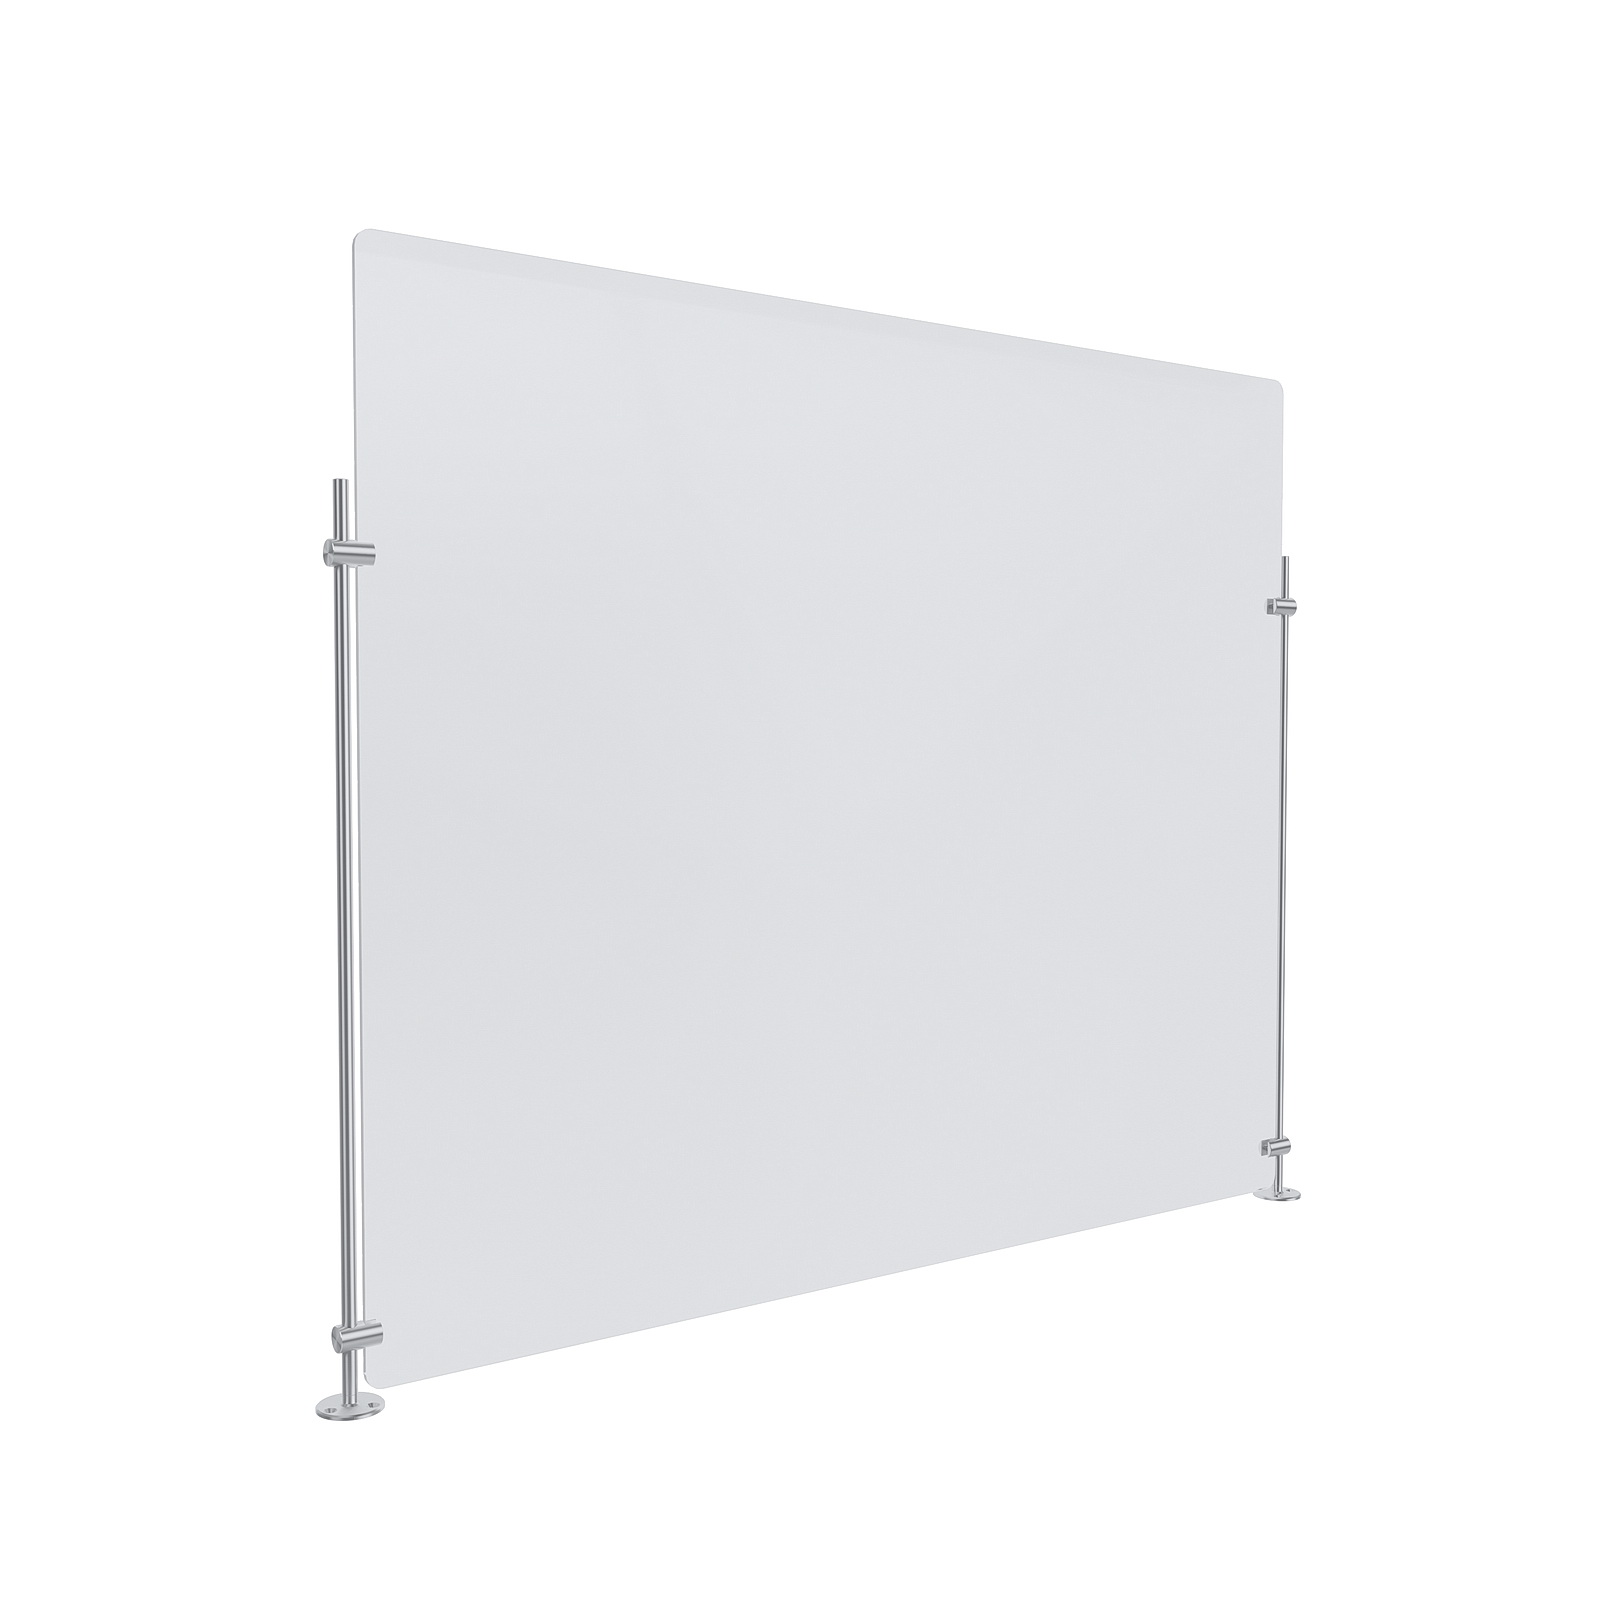 Clear Acrylic Sneeze Guard 36'' Wide x 30'' Tall, with (2) 24'' Tall x 3/8'' Diameter Clear Anodized Aluminum Rods on the Side.